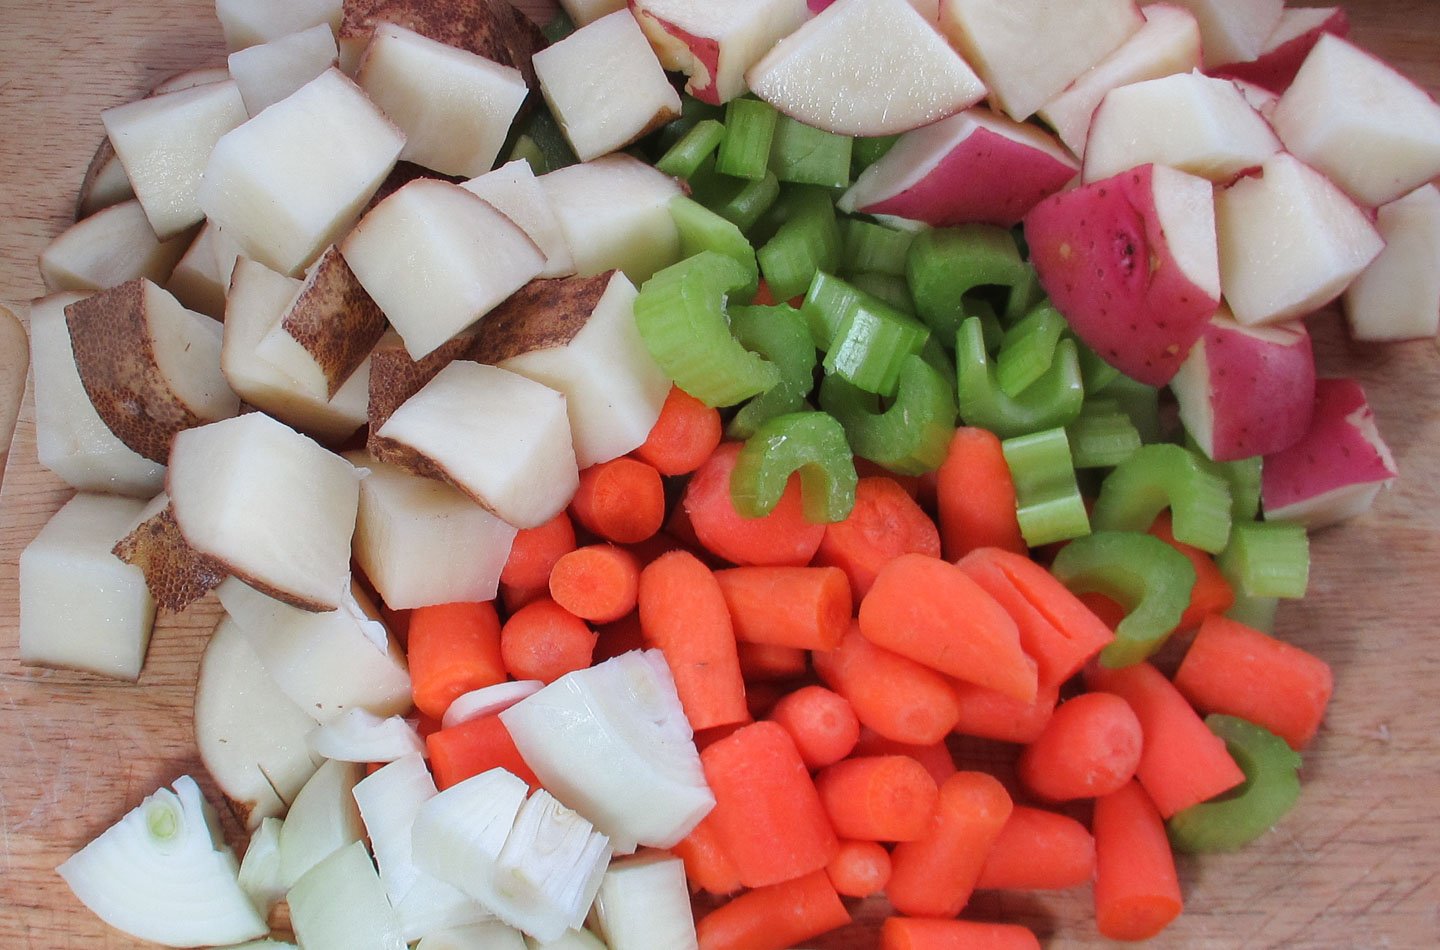 Cubes of potatoes, celery, carrots, and onions.